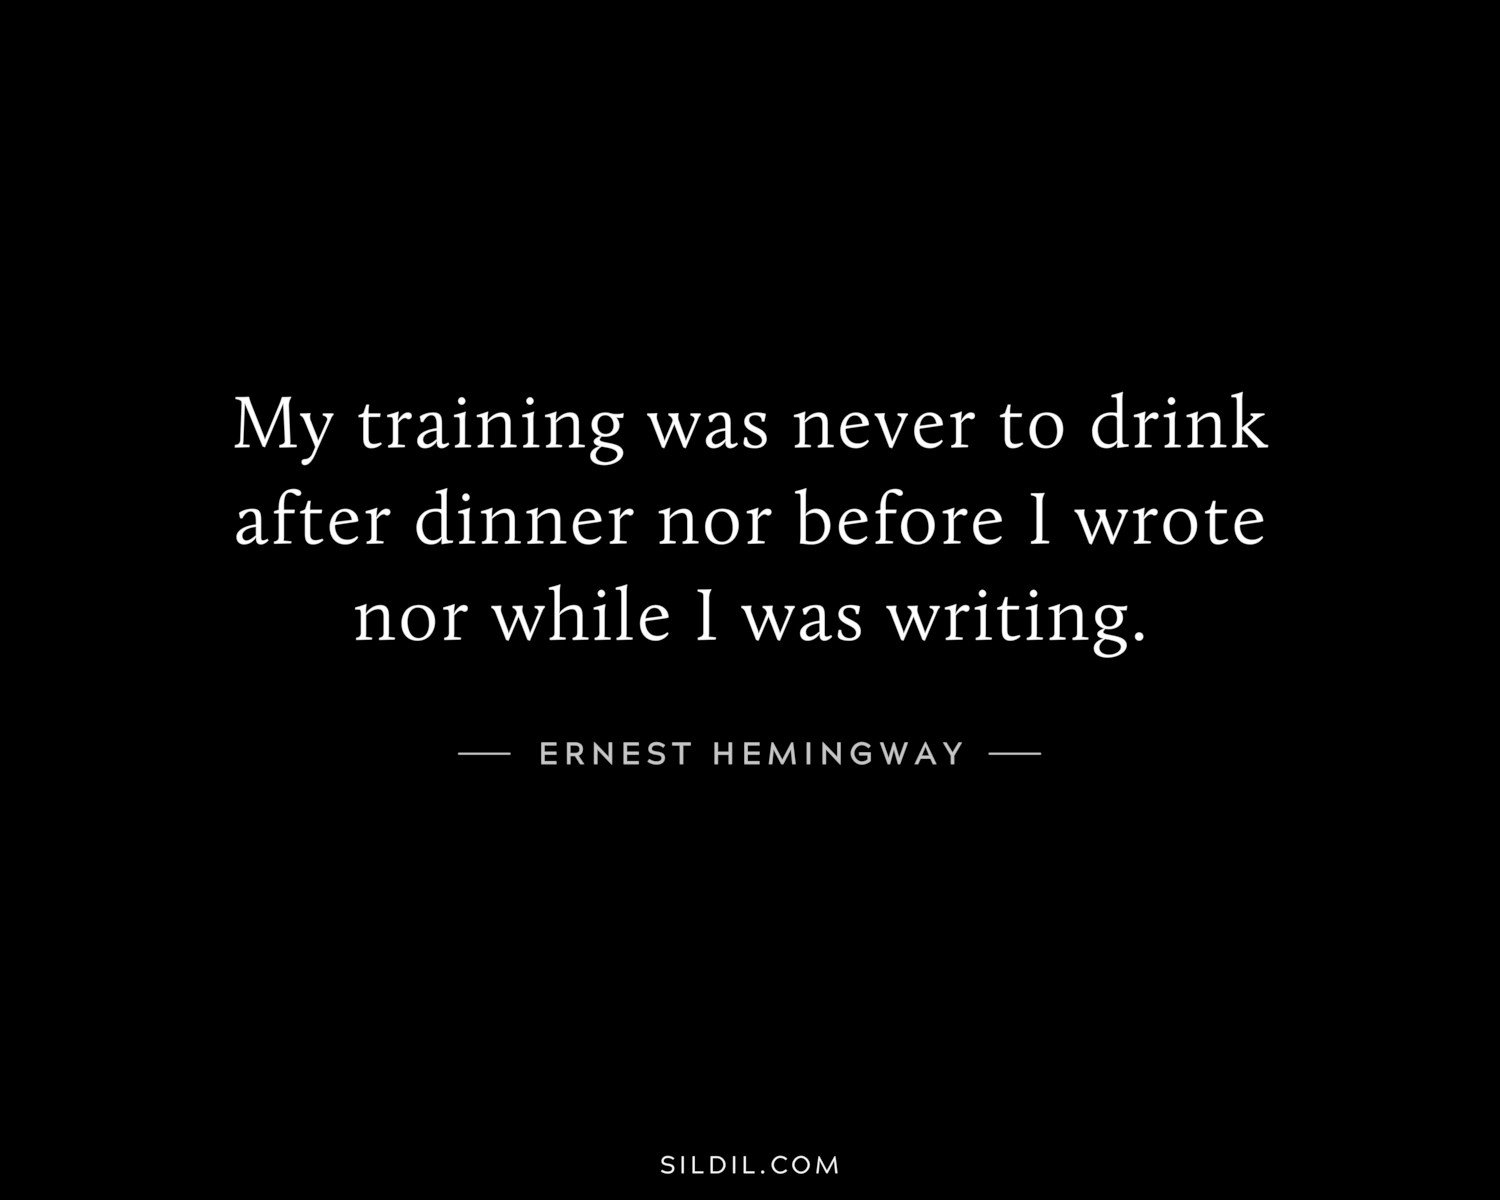 My training was never to drink after dinner nor before I wrote nor while I was writing.